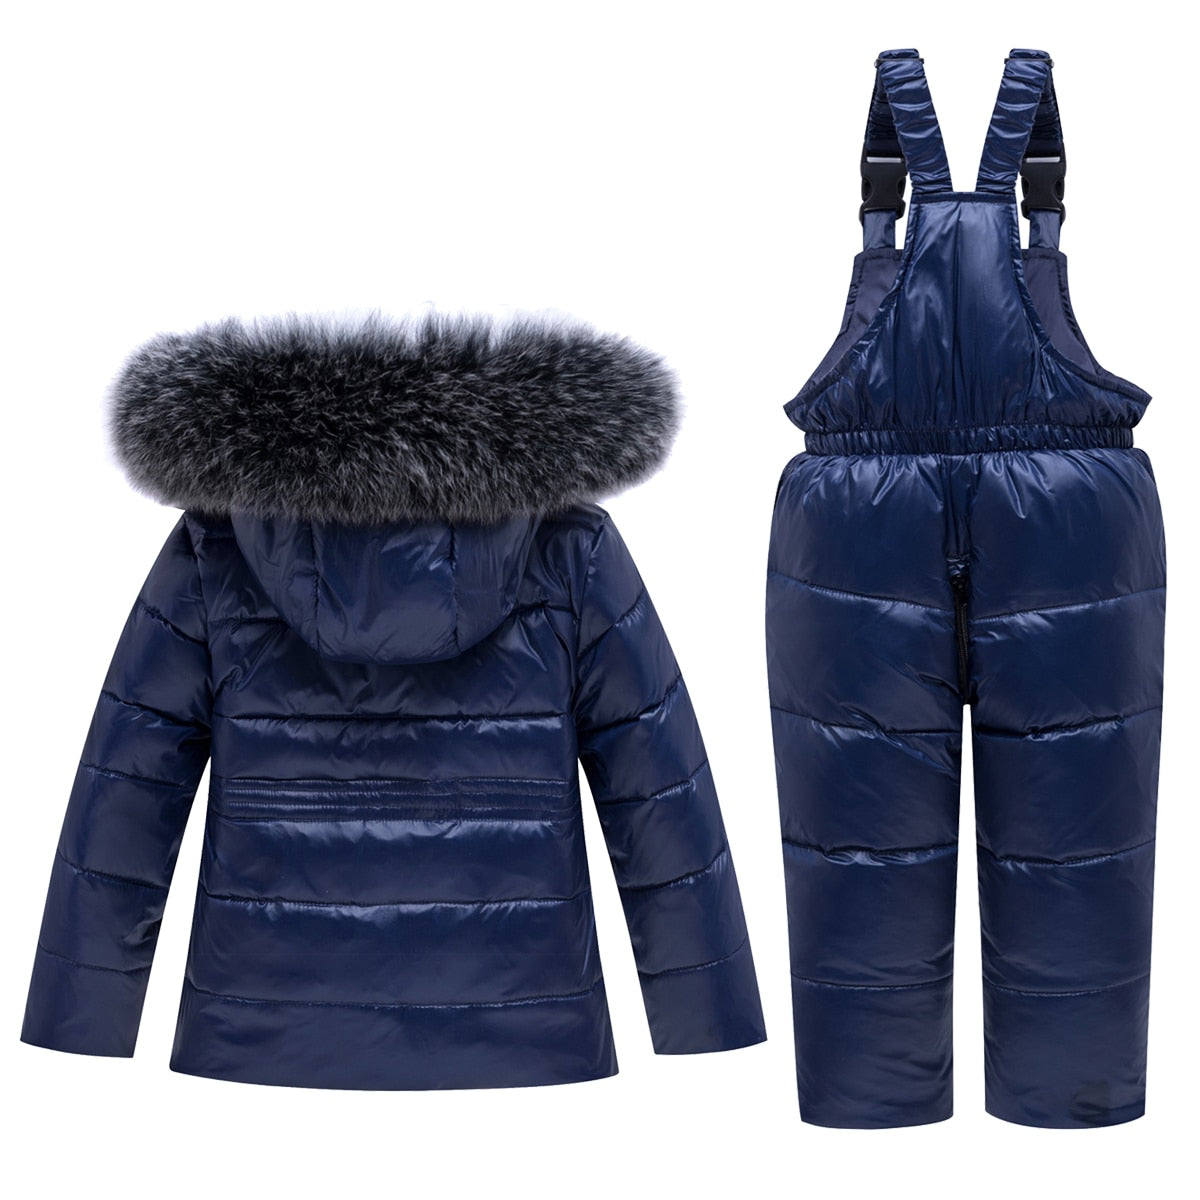 Winter Children Ski Suit Windproof Warm Boys Clothing Set Jacket+Overalls Boys Clothes Set 0-4 Years Kids Snow Suits Real Fur